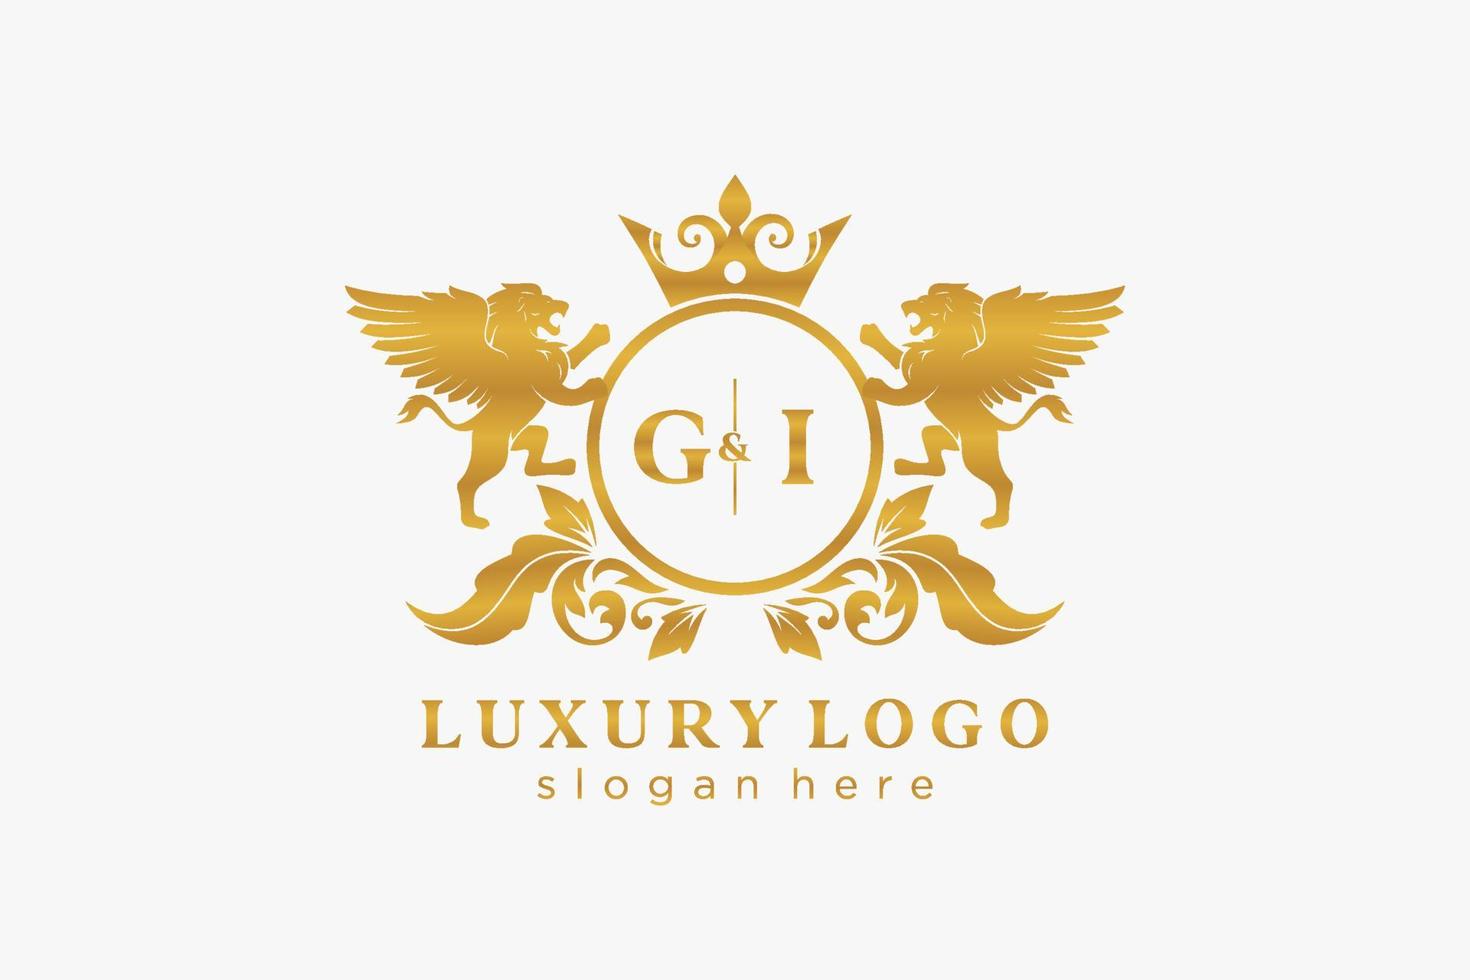 Initial GI Letter Lion Royal Luxury Logo template in vector art for Restaurant, Royalty, Boutique, Cafe, Hotel, Heraldic, Jewelry, Fashion and other vector illustration.